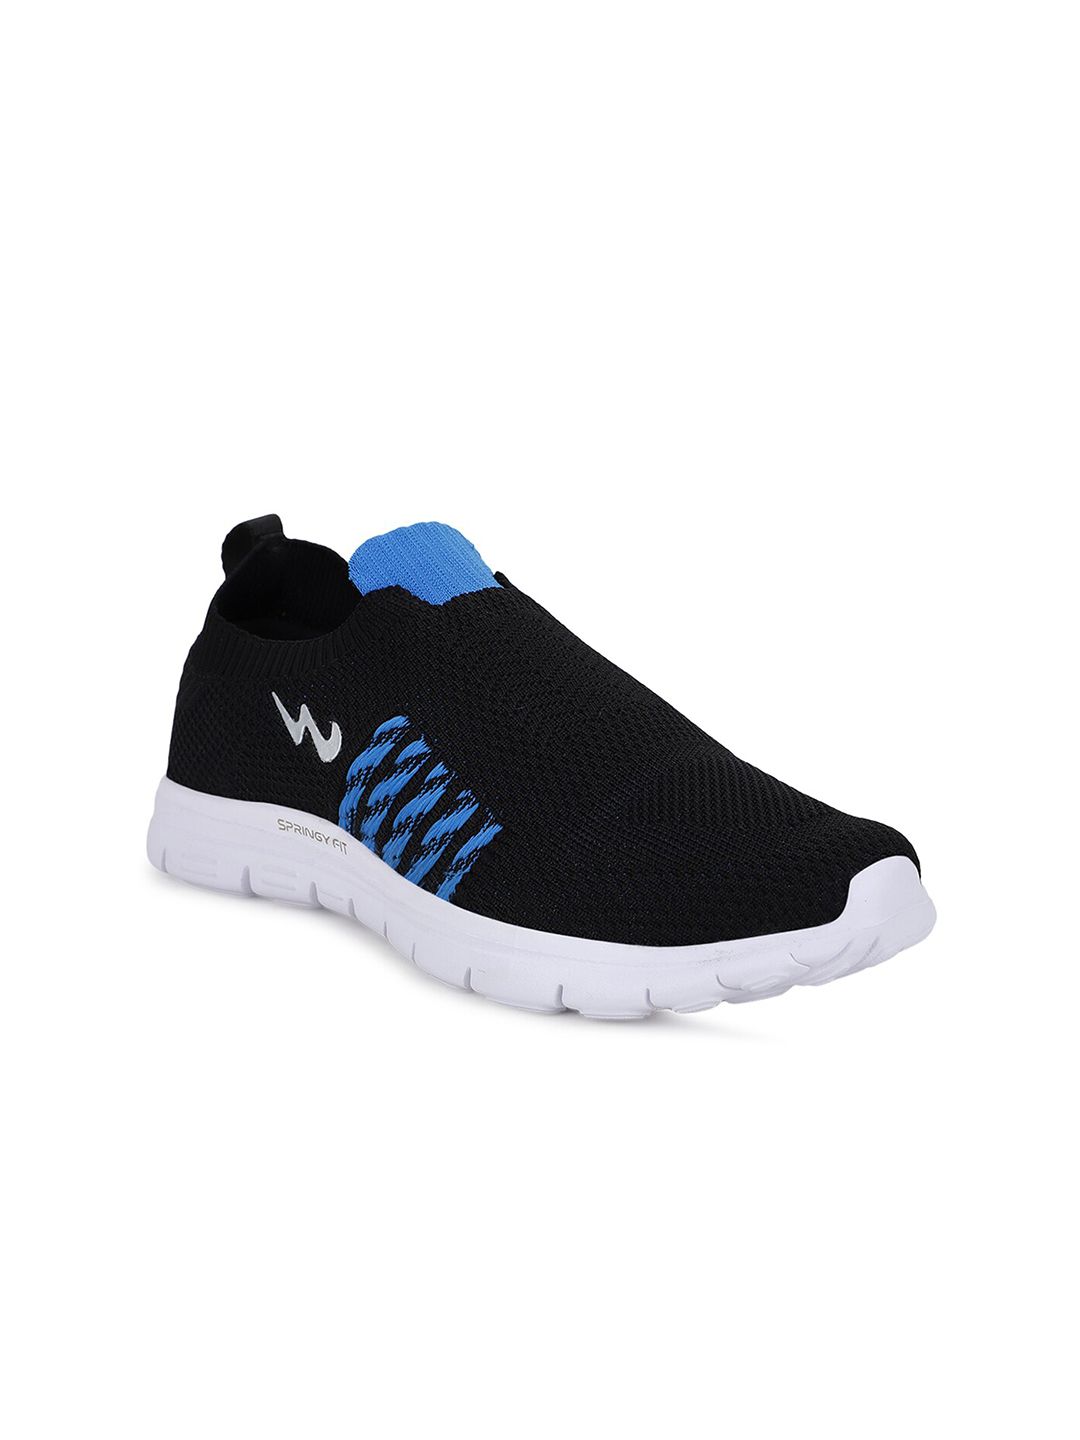 Campus Women Black Mesh Springy Fit Running Shoes Price in India